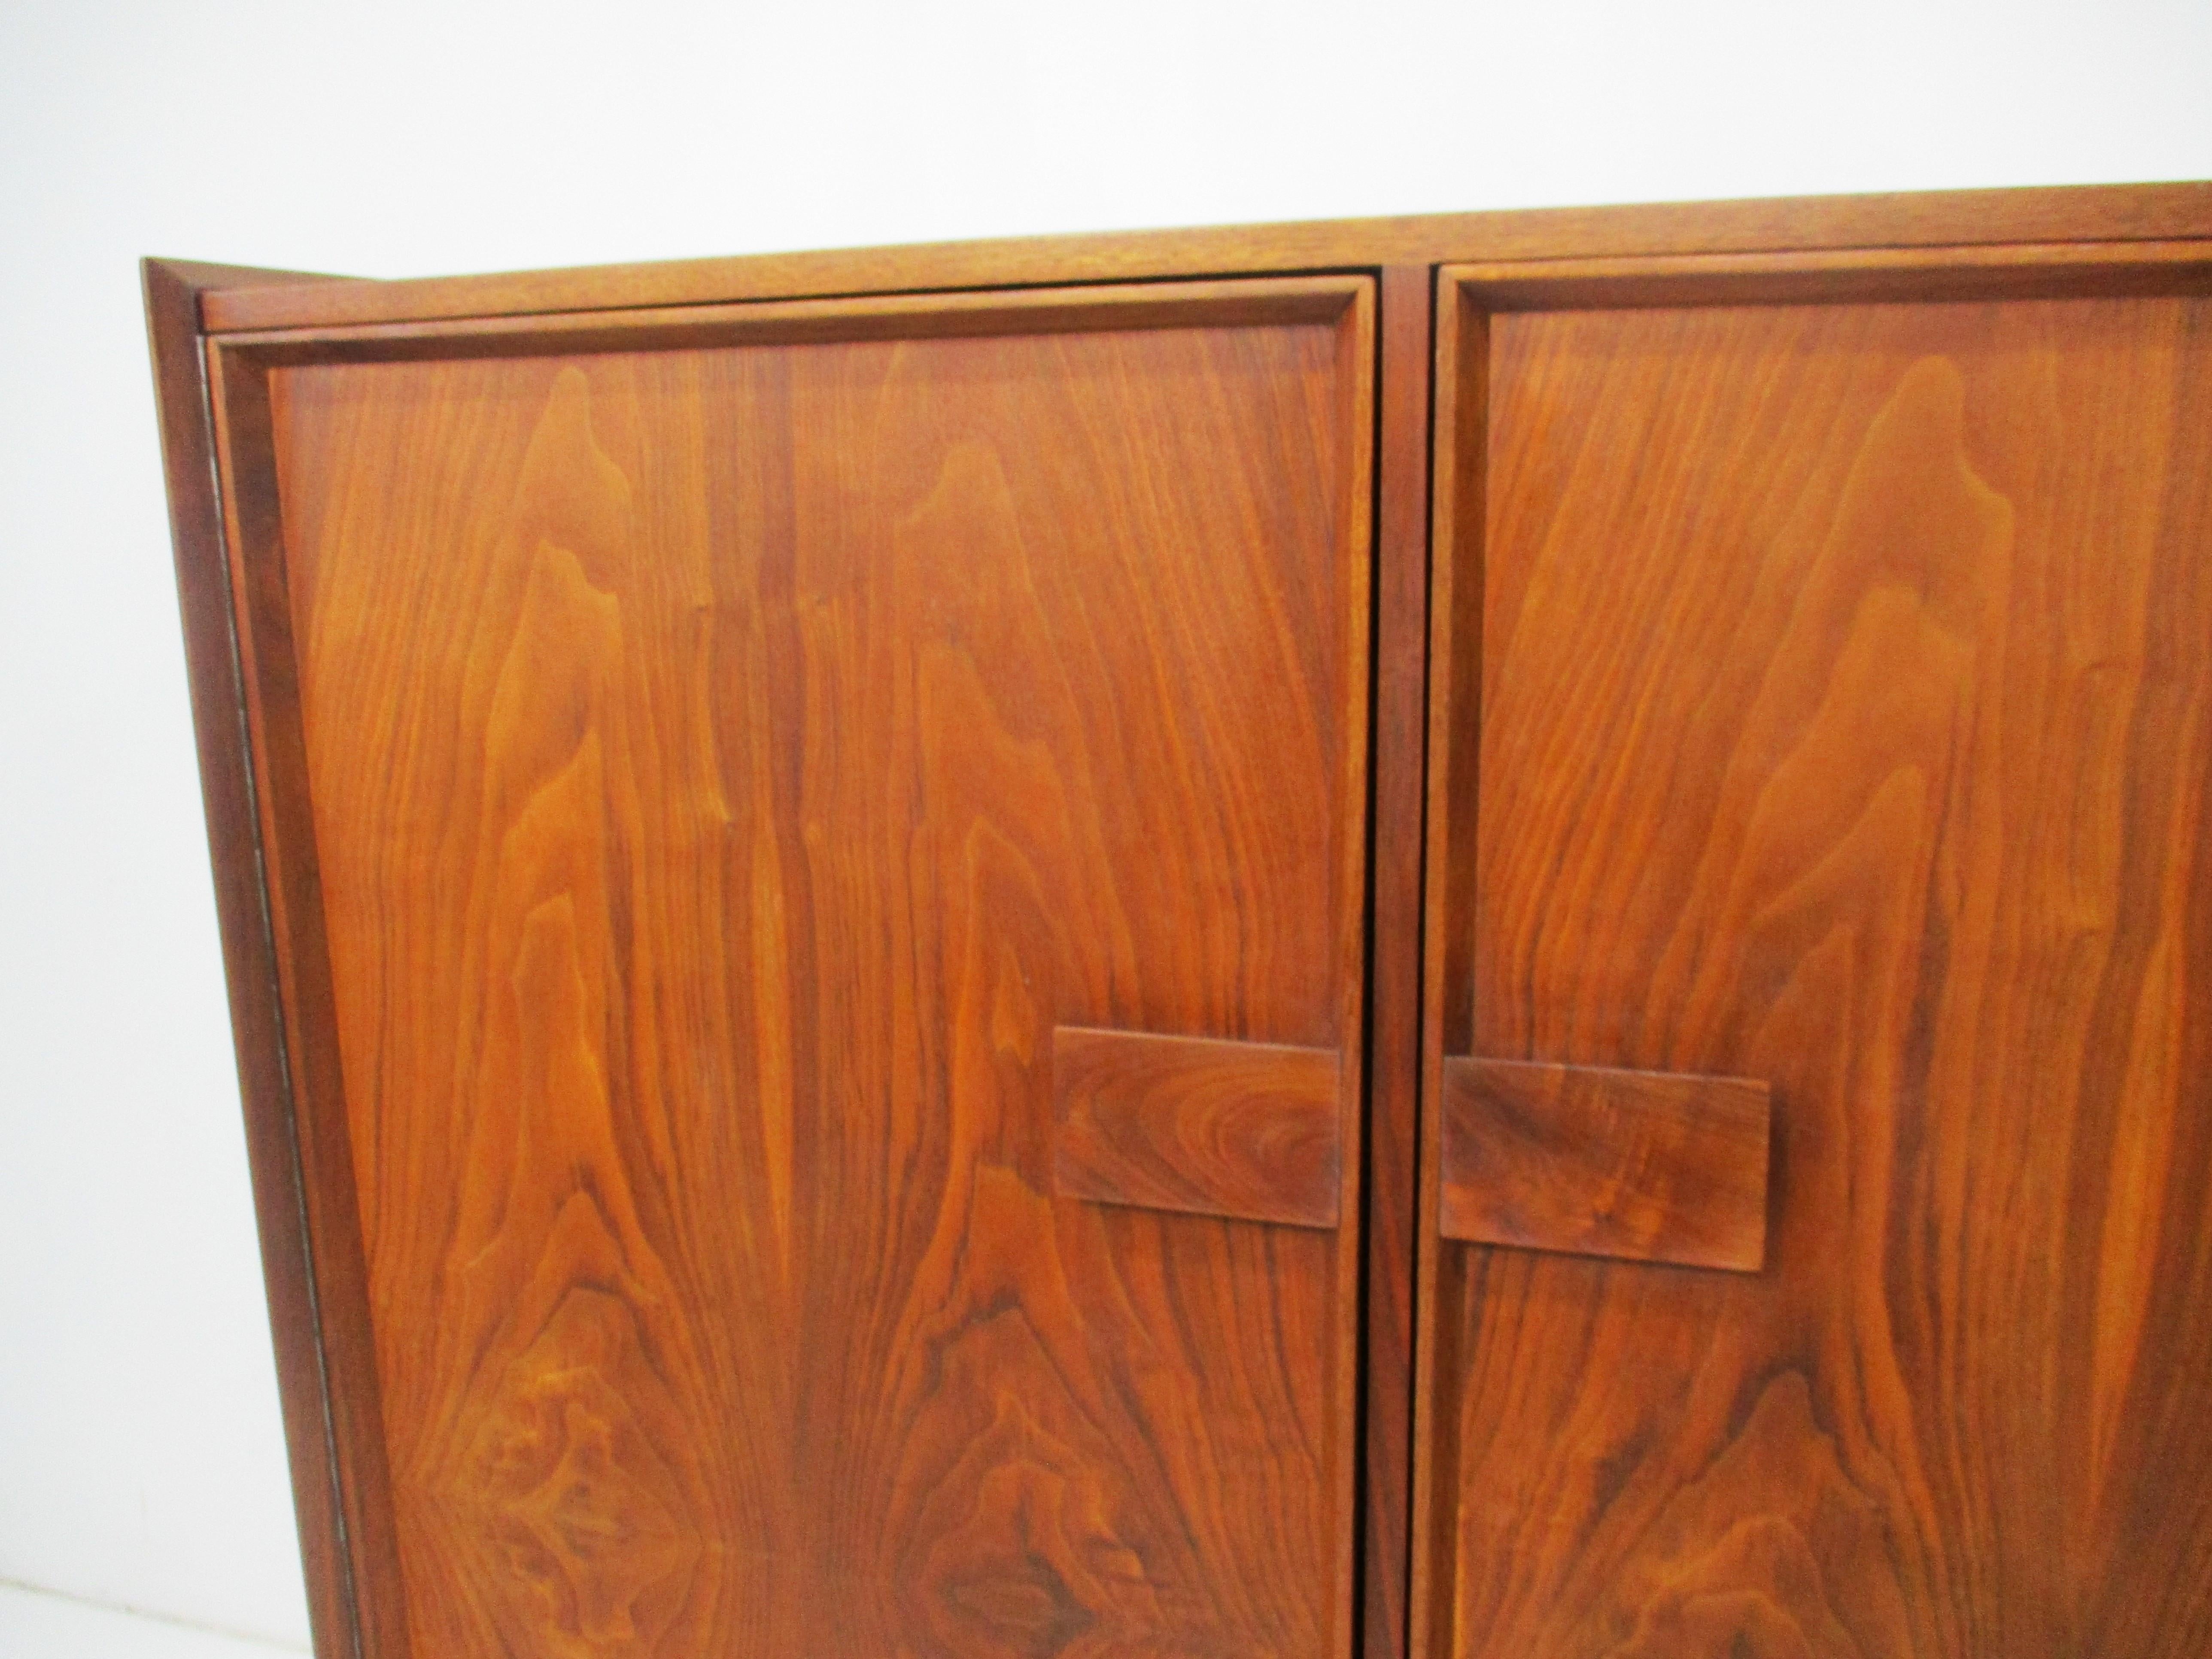 Tall Black Walnut Dresser / Chest in the style of George Nakashima  6